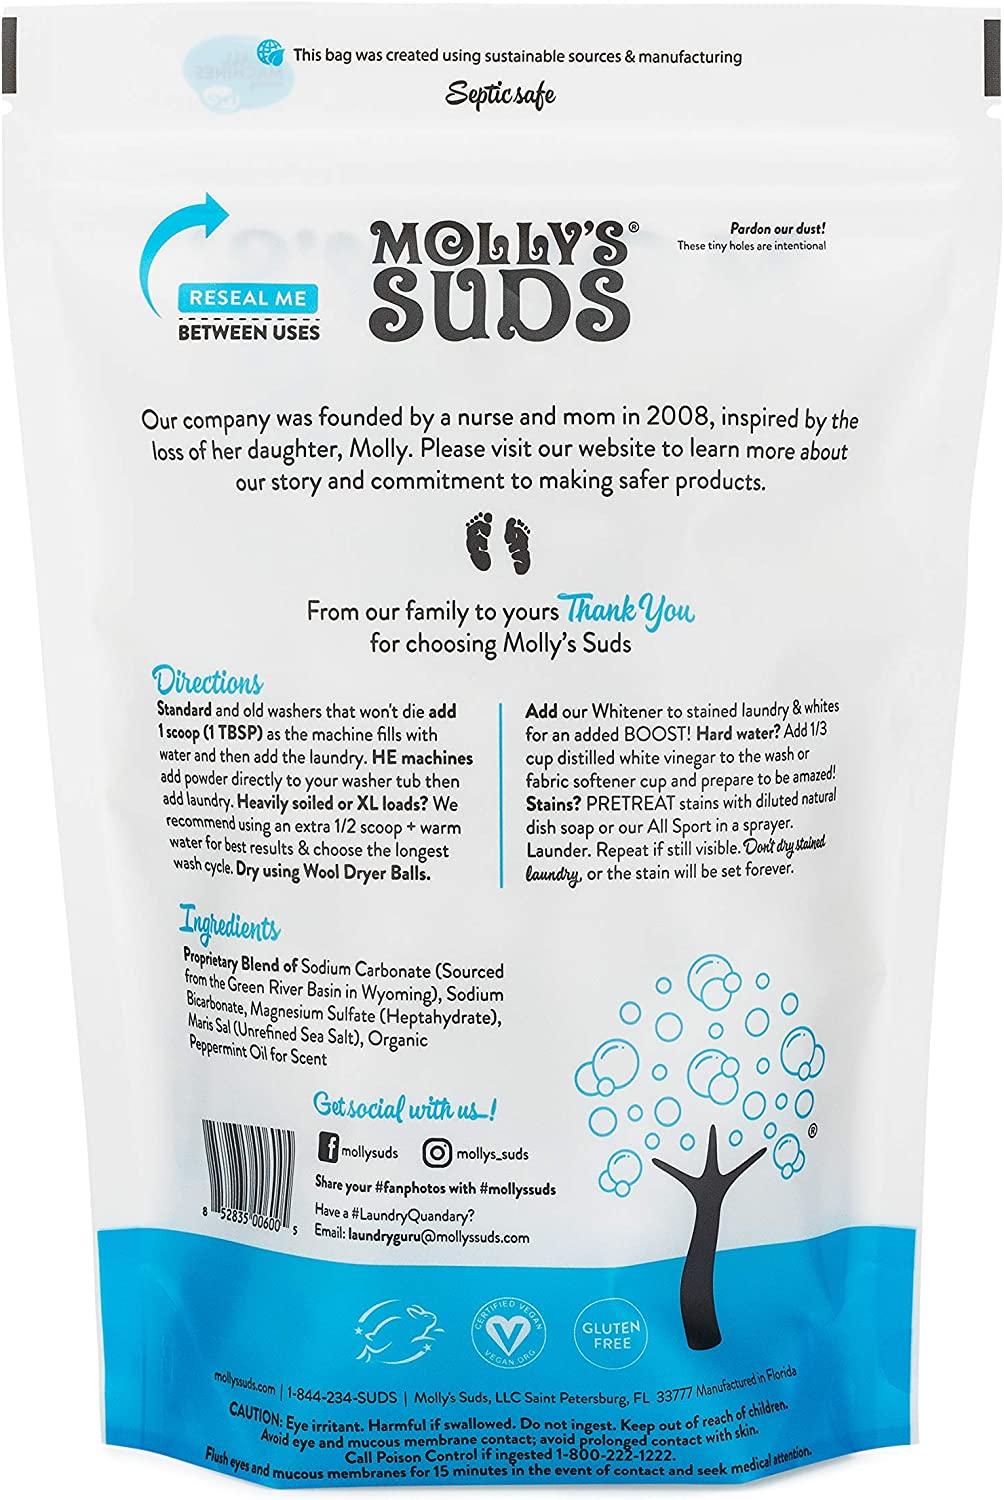 Molly's Suds Laundry Powder 120 Loads - Unscented